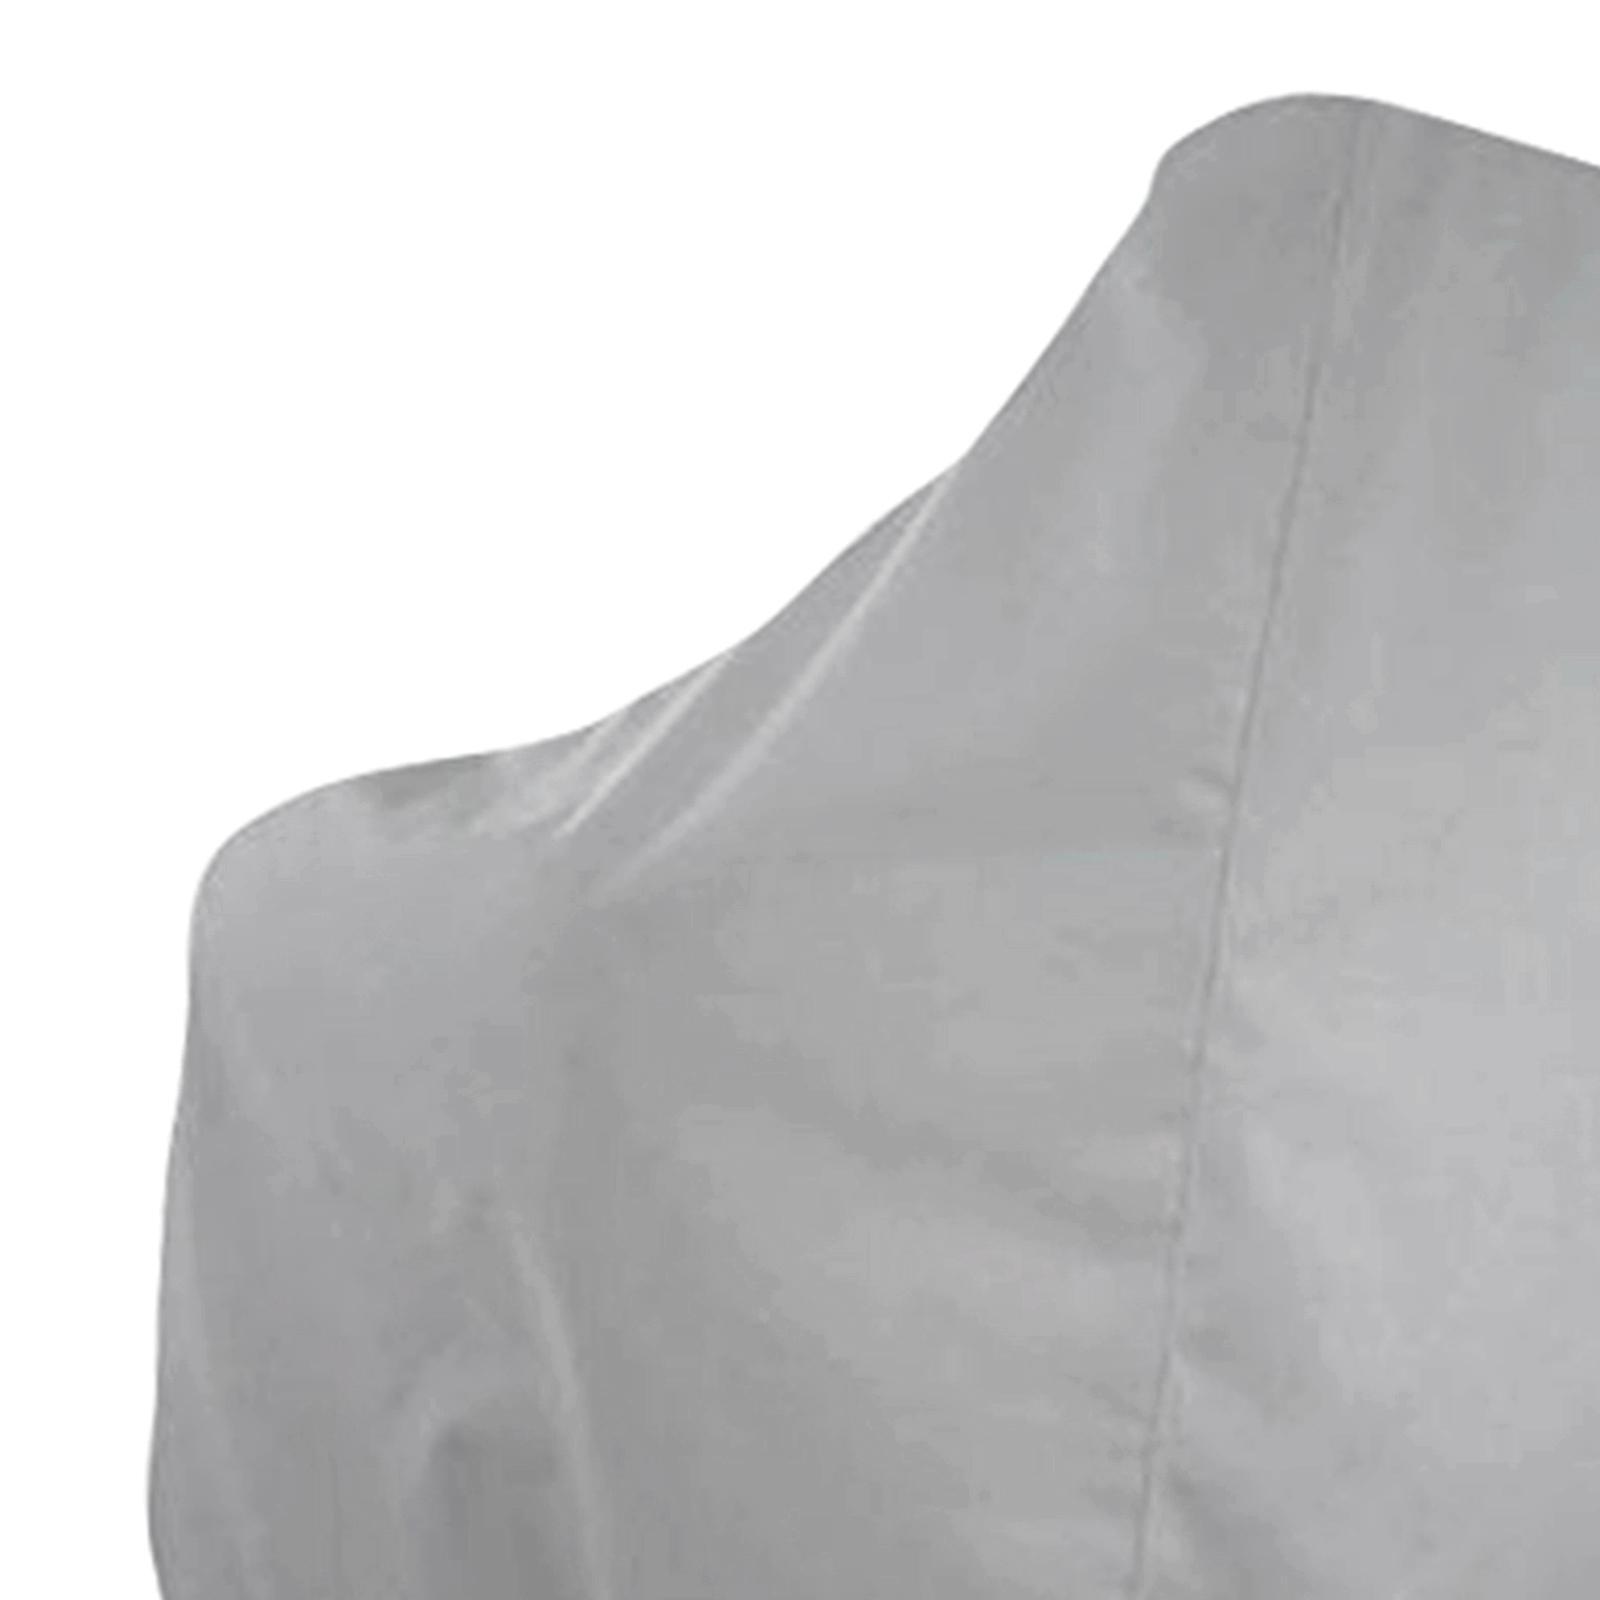 3X Boat Seat Cover Outdoor Yacht Waterproof  Protection